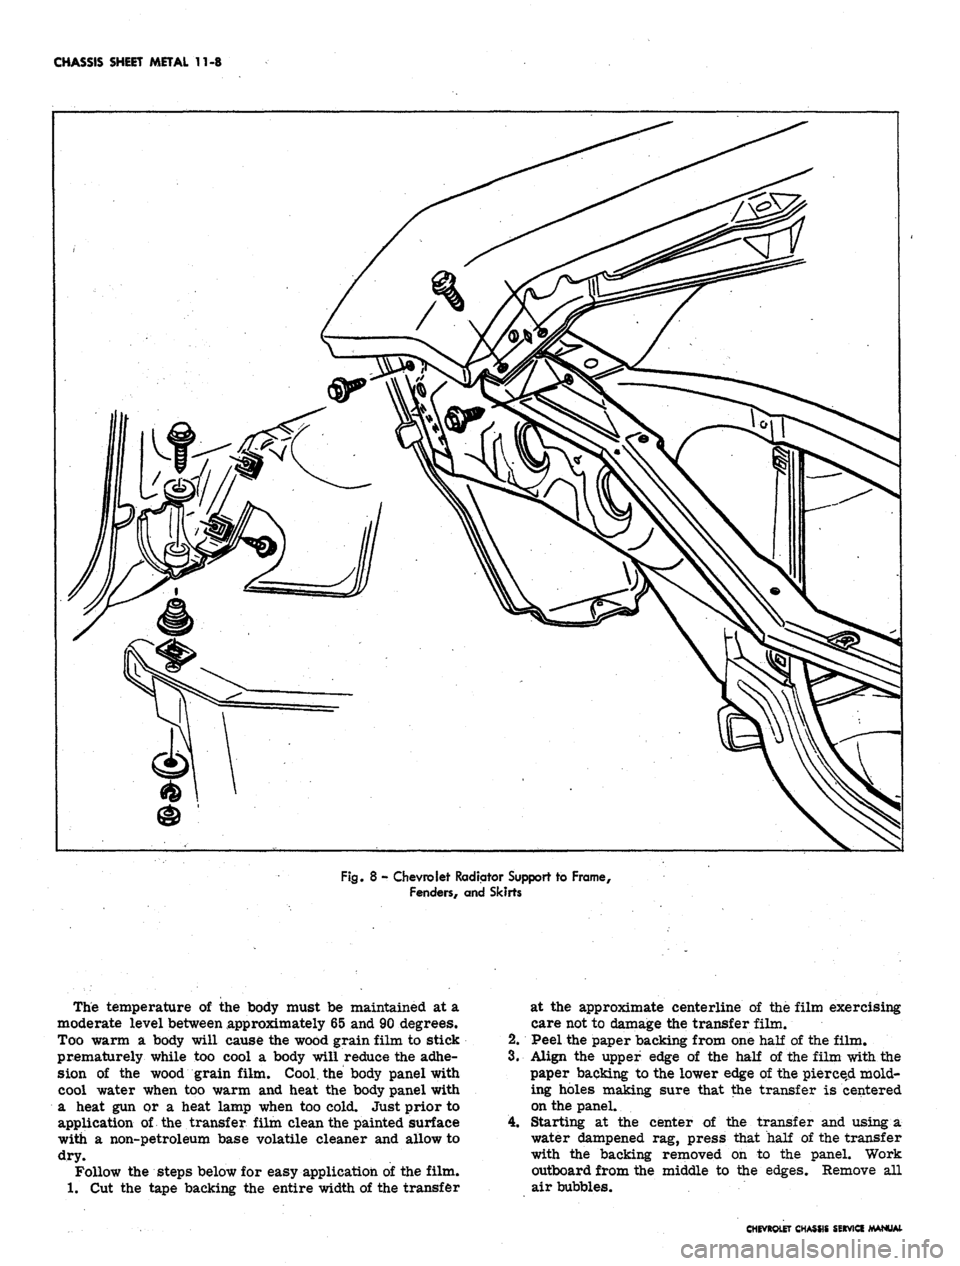 CHEVROLET CAMARO 1967 1.G Chassis Workshop Manual 
CHASSIS SHEET METAL 11-8

Fig.
 8 - Chevrolet Radiator Support to Frame,

Fenders, and Skirts

The temperature of the body must be maintained at a

moderate level between approximately 65 and 90 degr